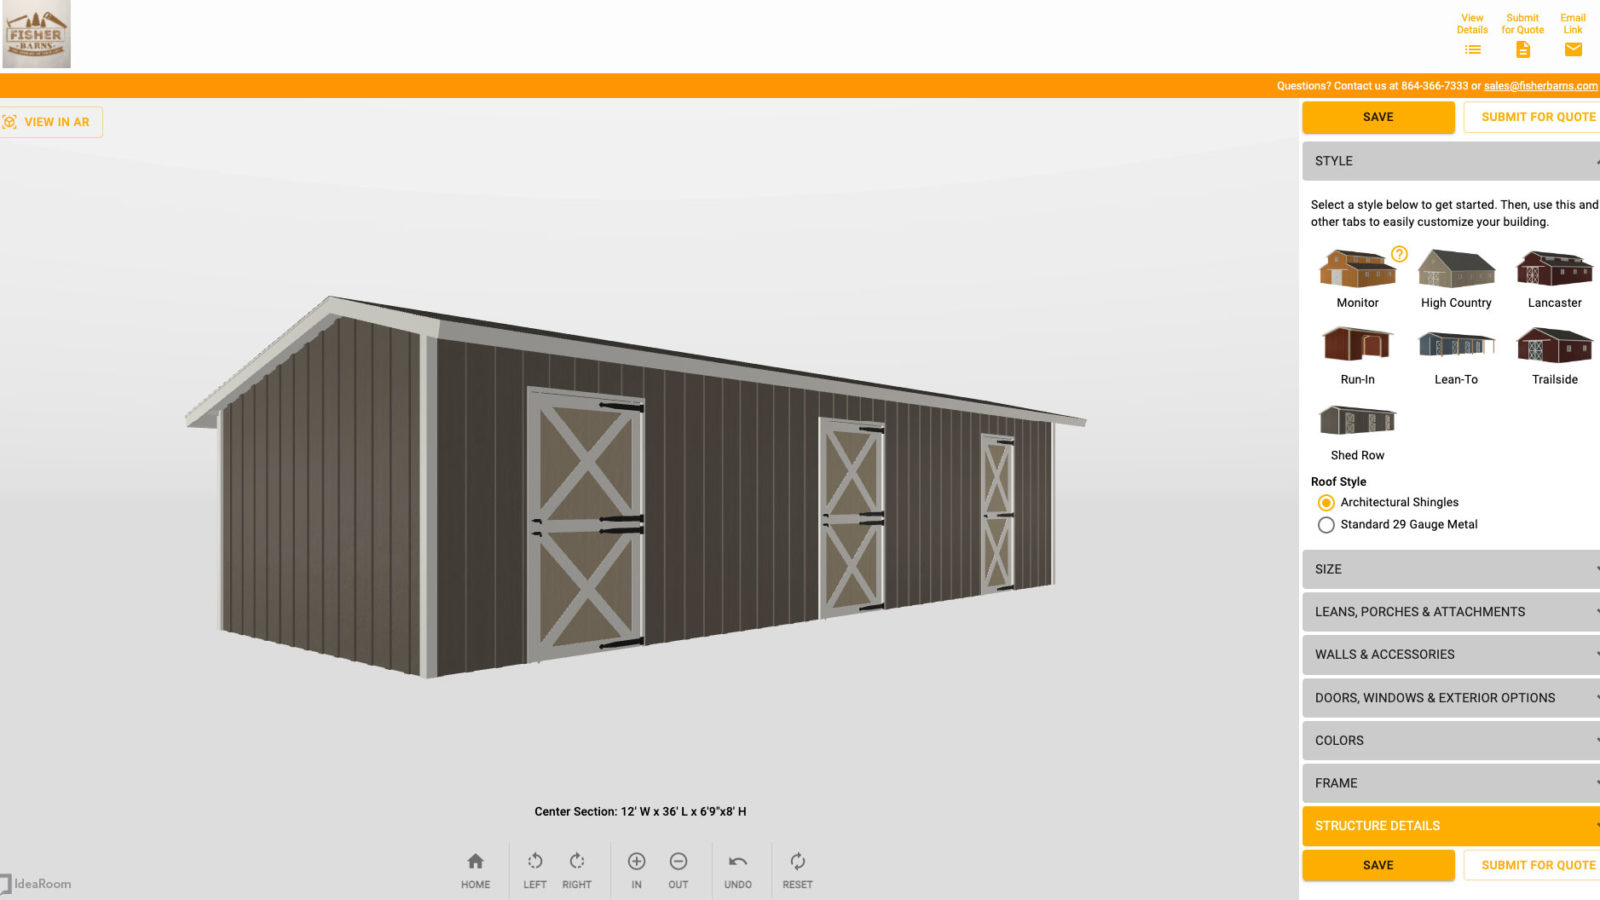 exterior of great quality 3d horse barn designer for shed row barns for sale in abbeville SC